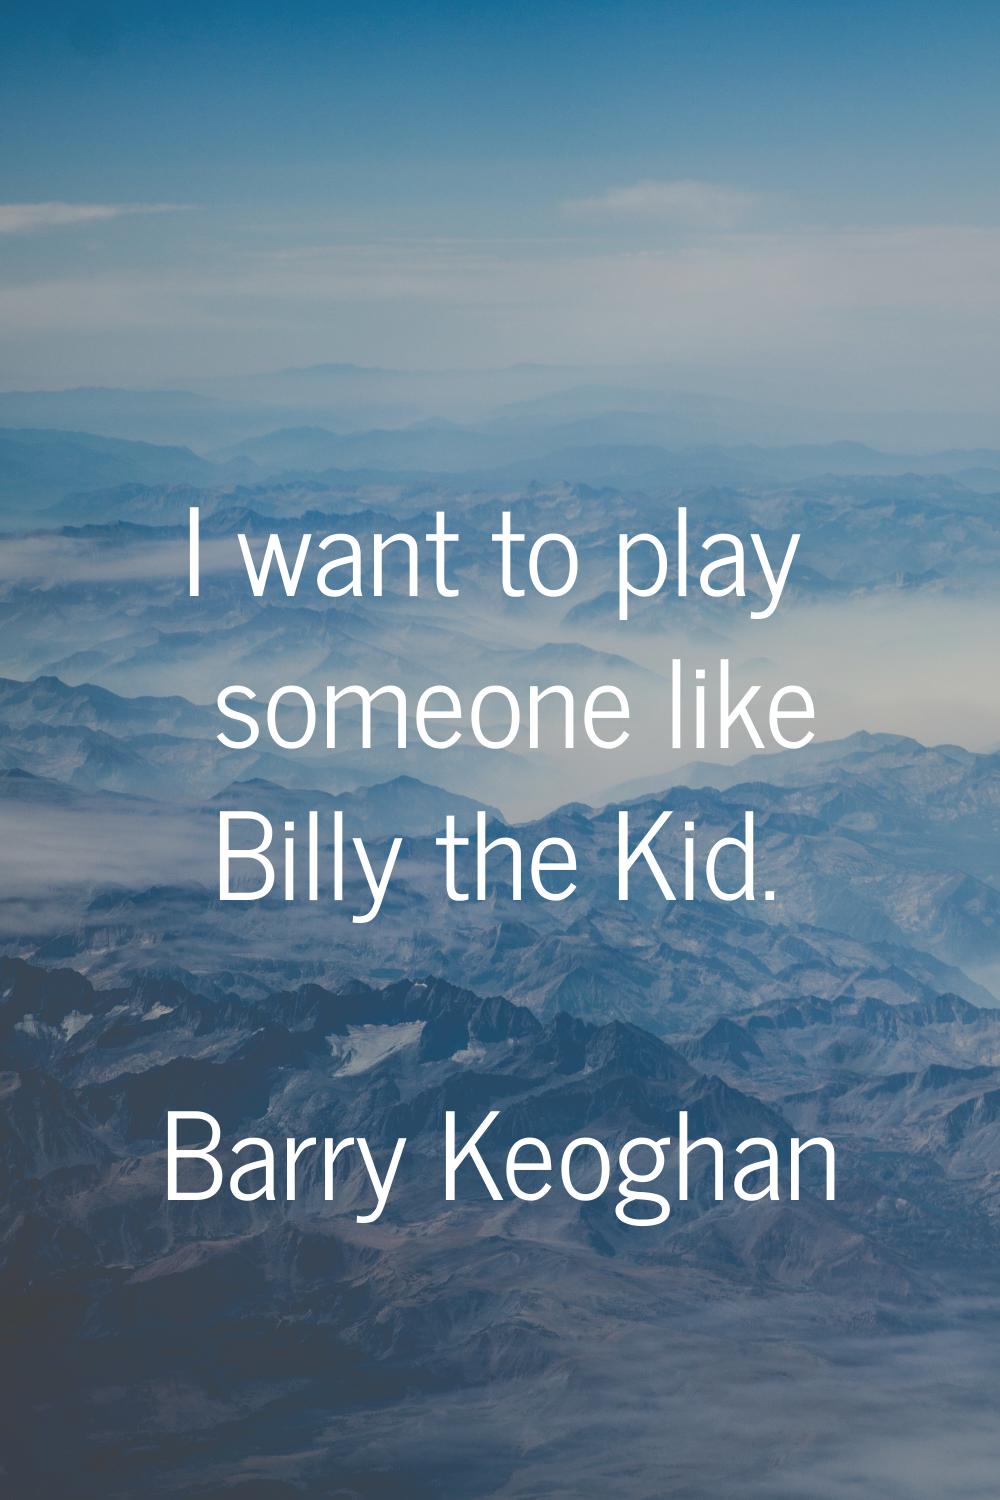 I want to play someone like Billy the Kid.